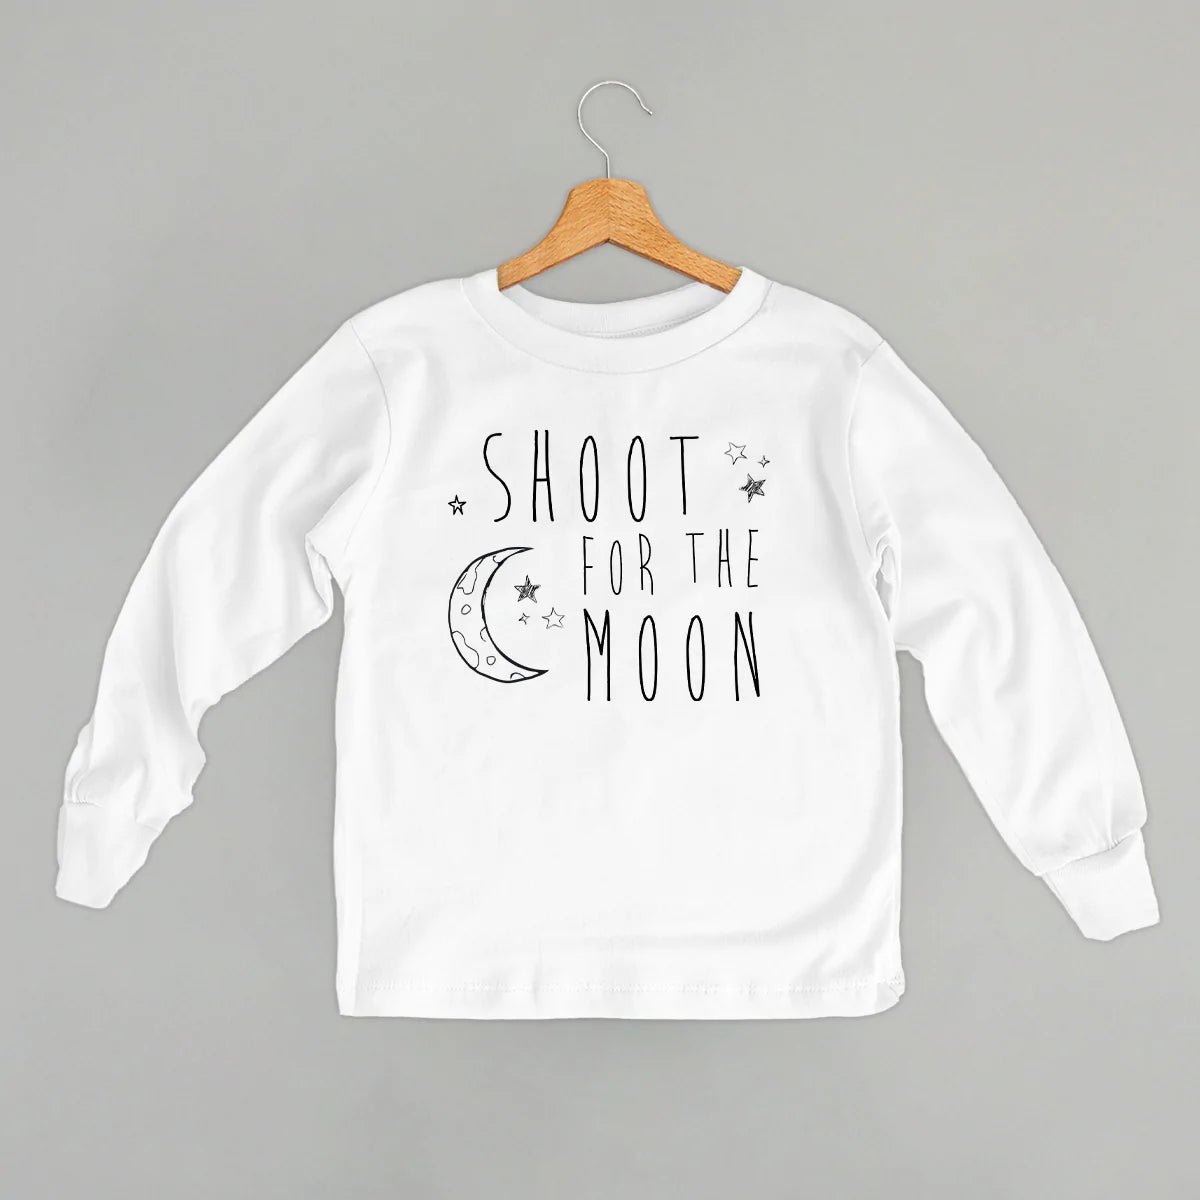 Shoot for the Moon (Kids)